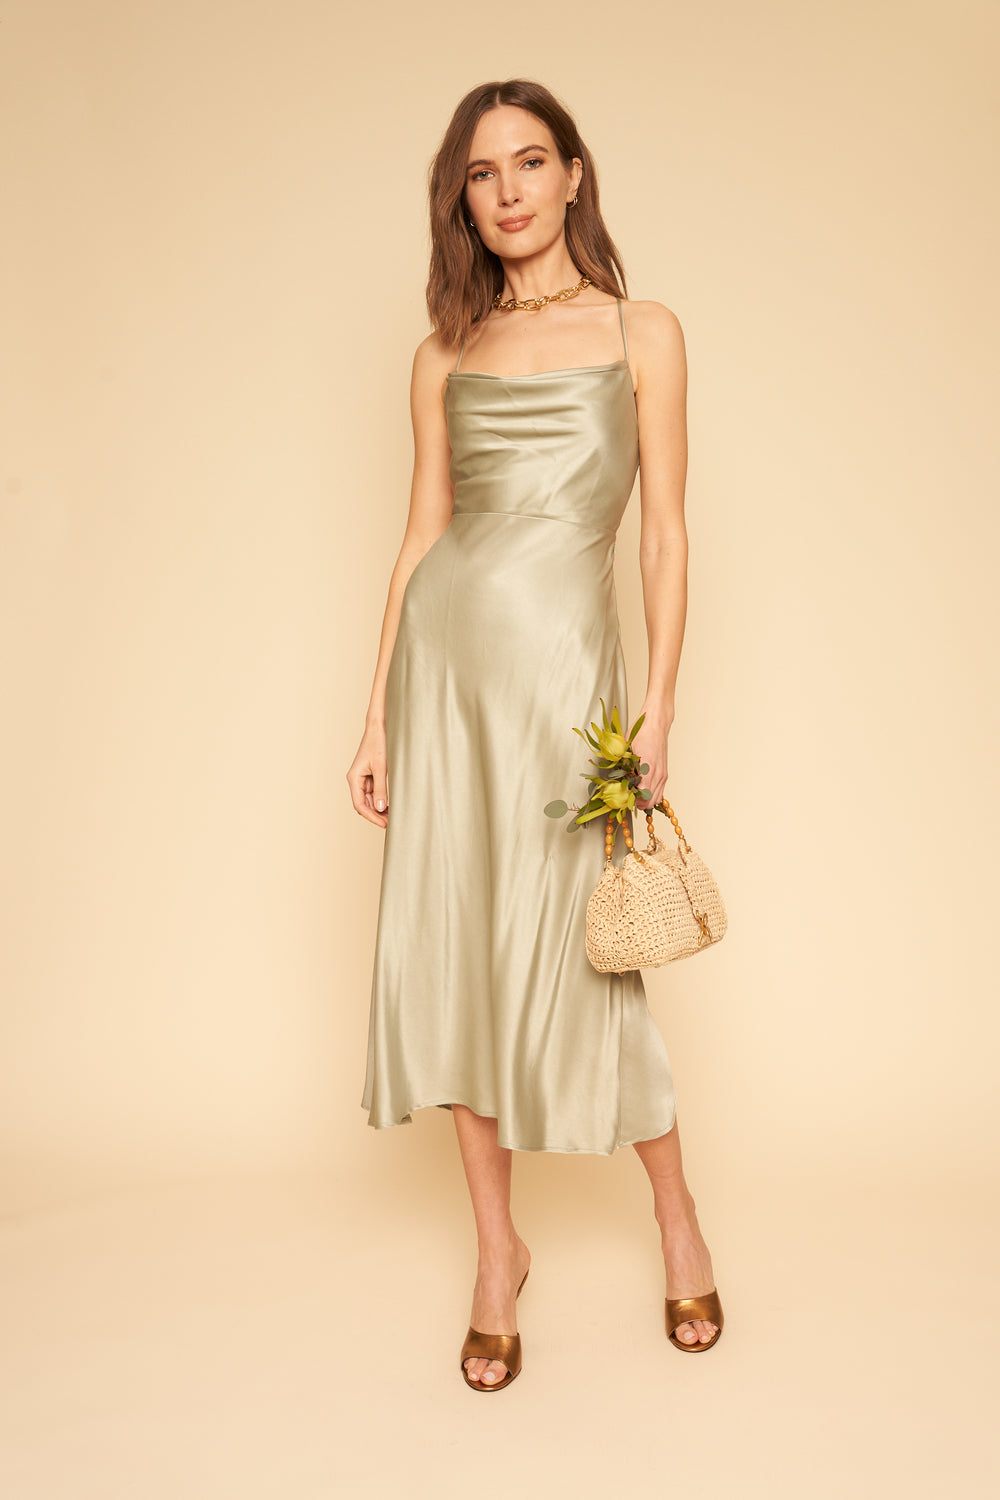 Camille Dress in Sage - Whimsy & Row